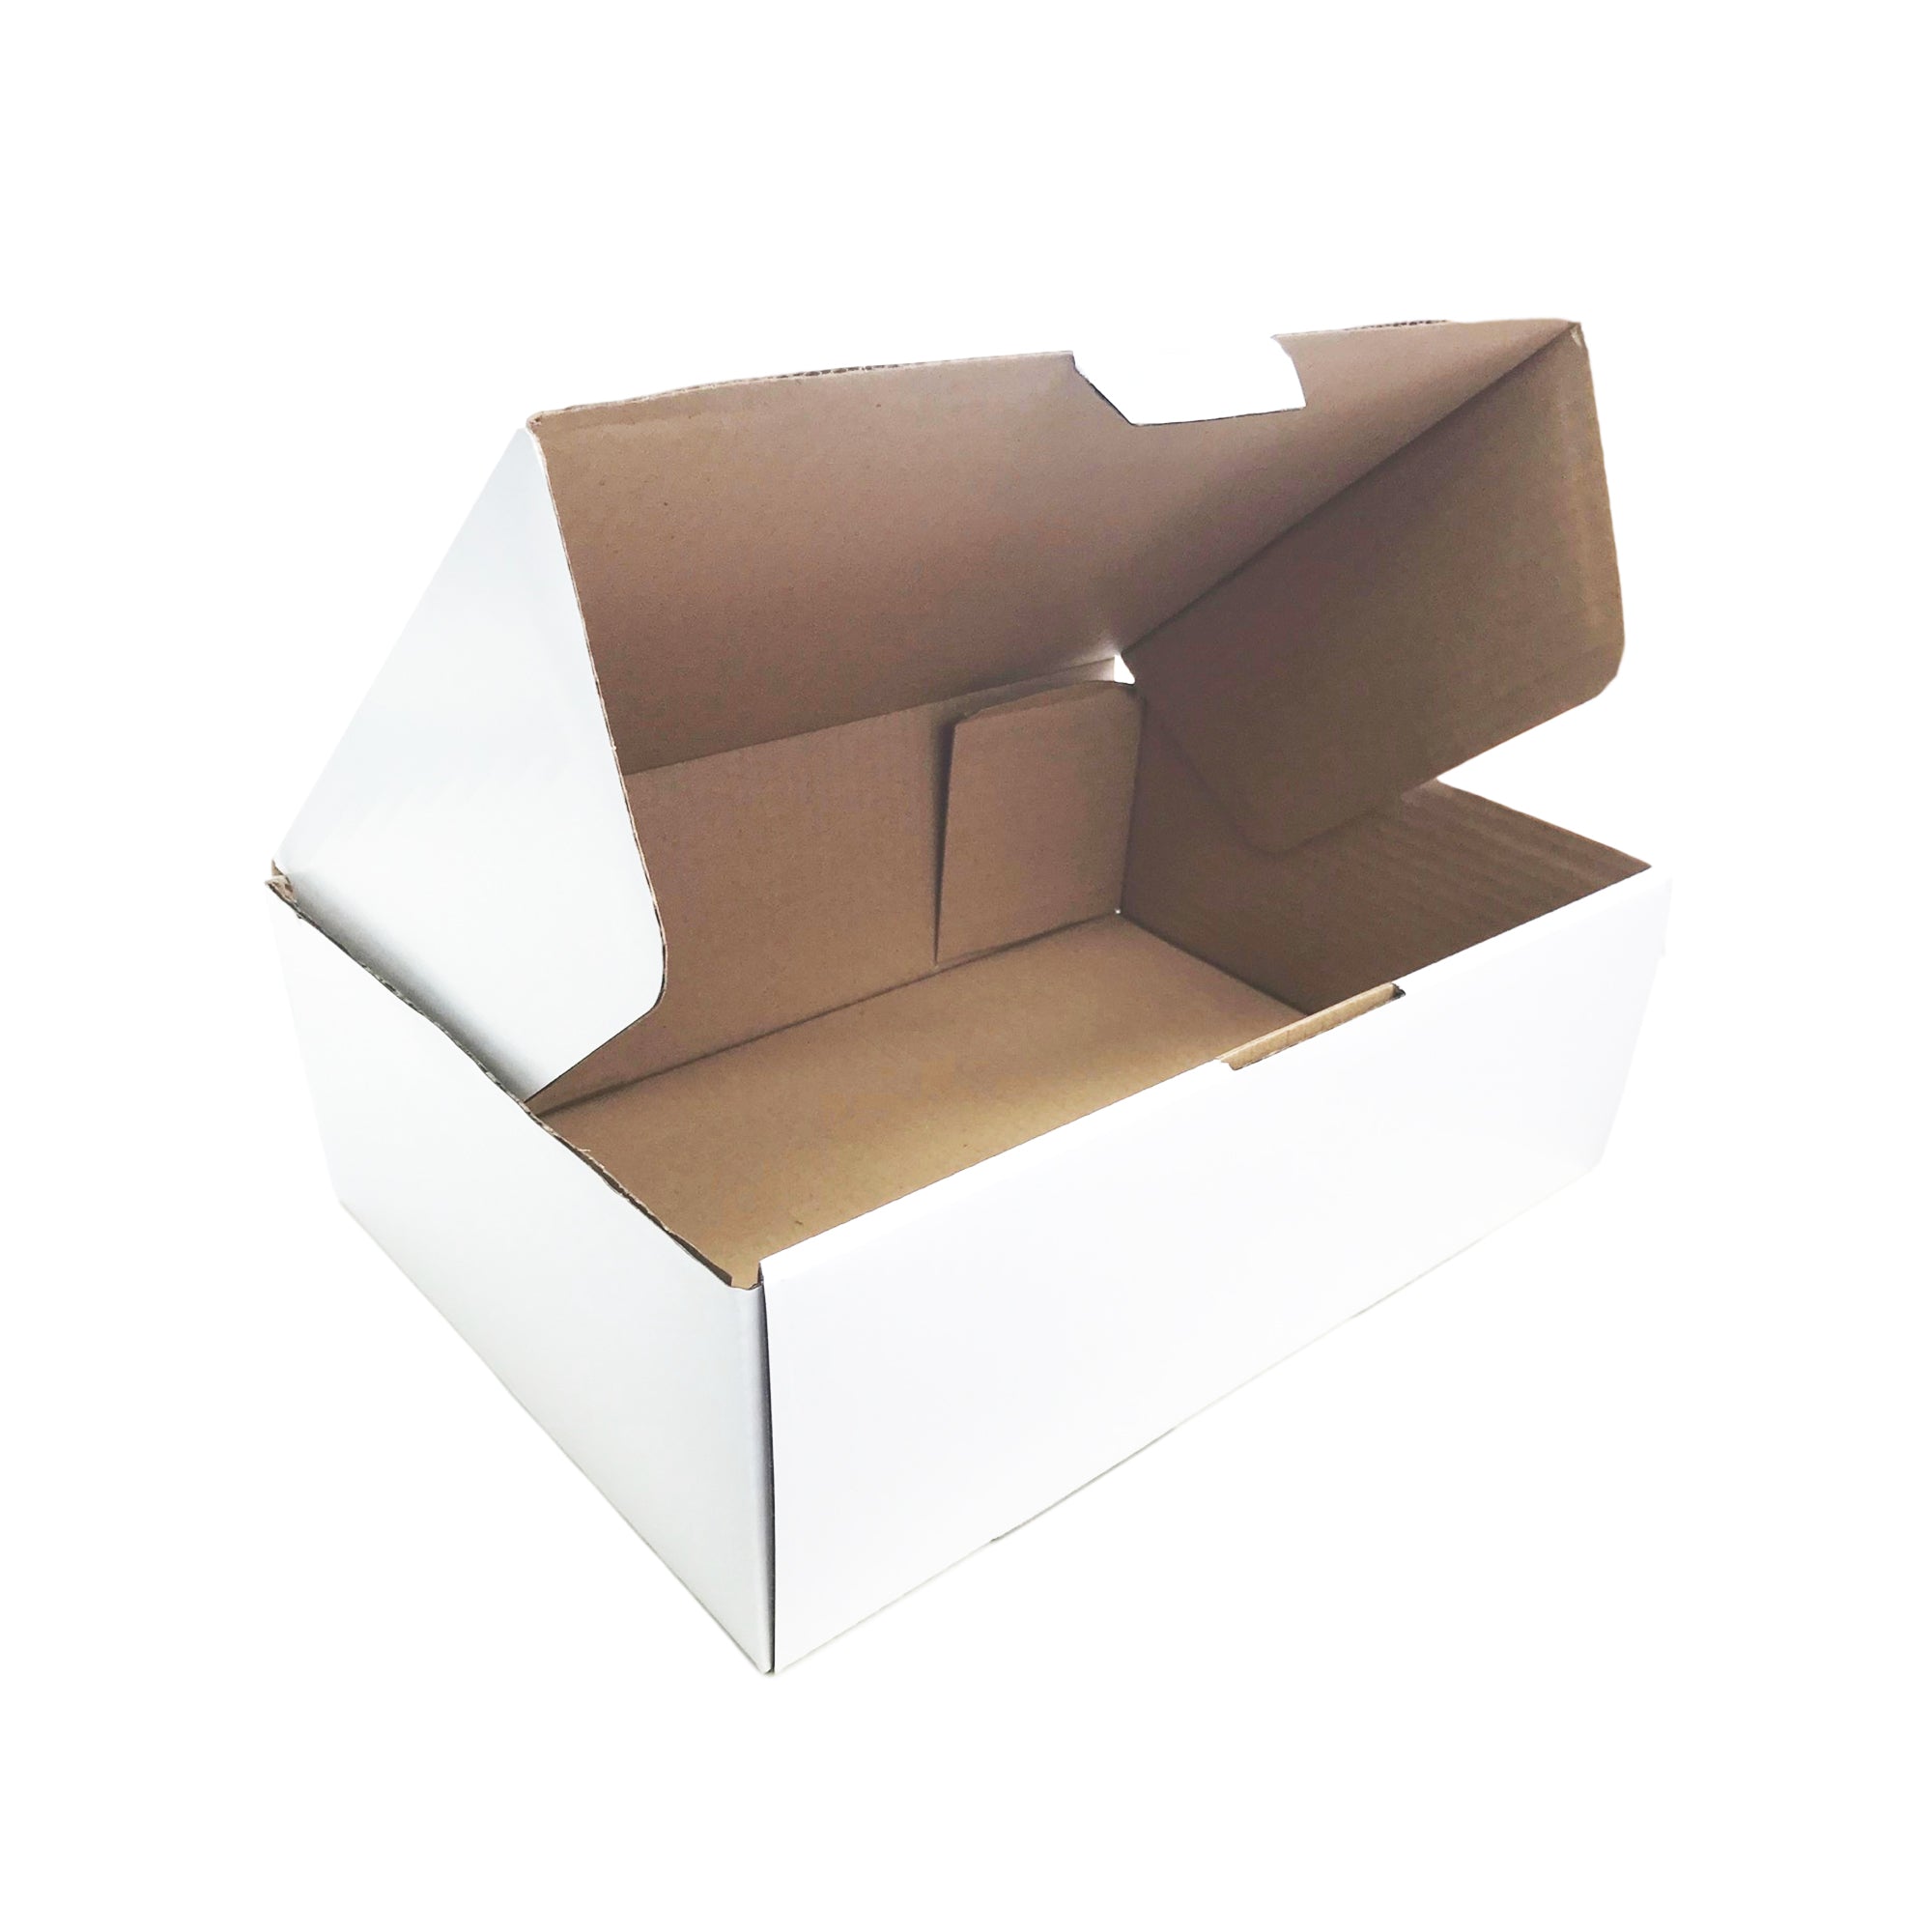 Top 10 questions about Mailing Boxes in e-Commerce Packaging